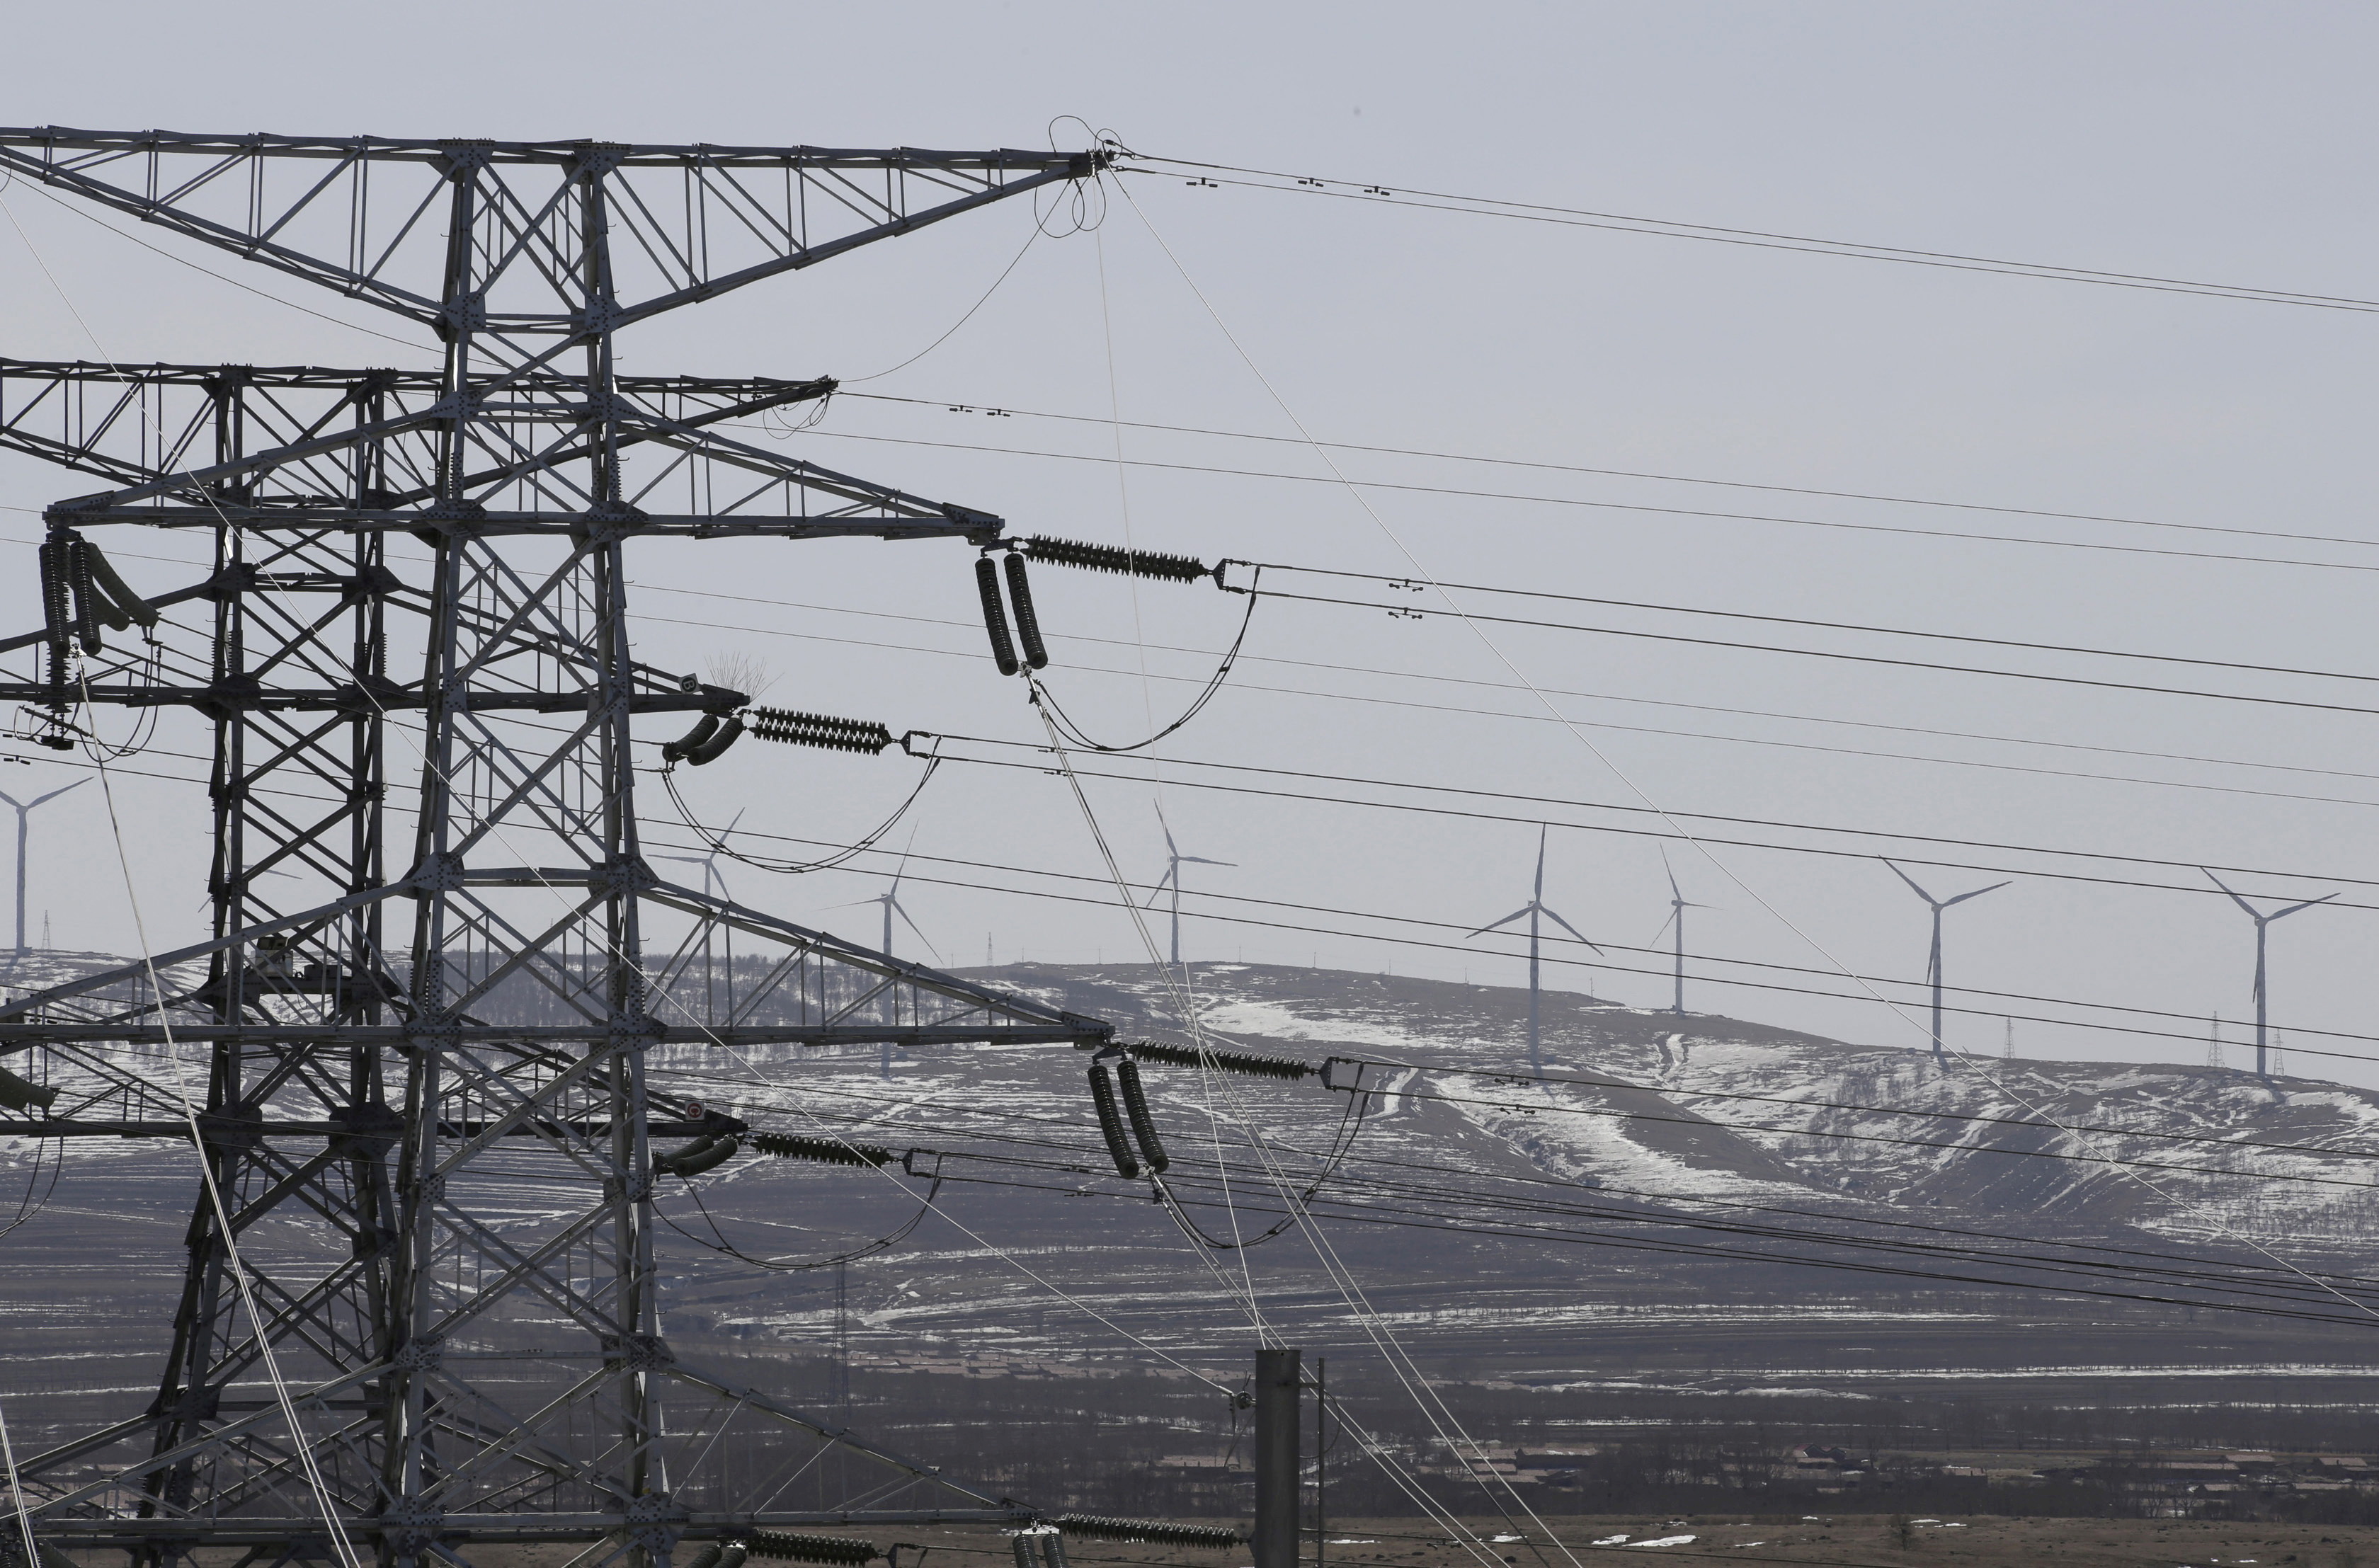 Power lines and wind turbines are pictured at a wind and solar energy storage and transmission power station of State Grid Corporation of China, in Zhangjiakou of Hebei province, China, March 18, 2016. REUTERS/Jason Lee